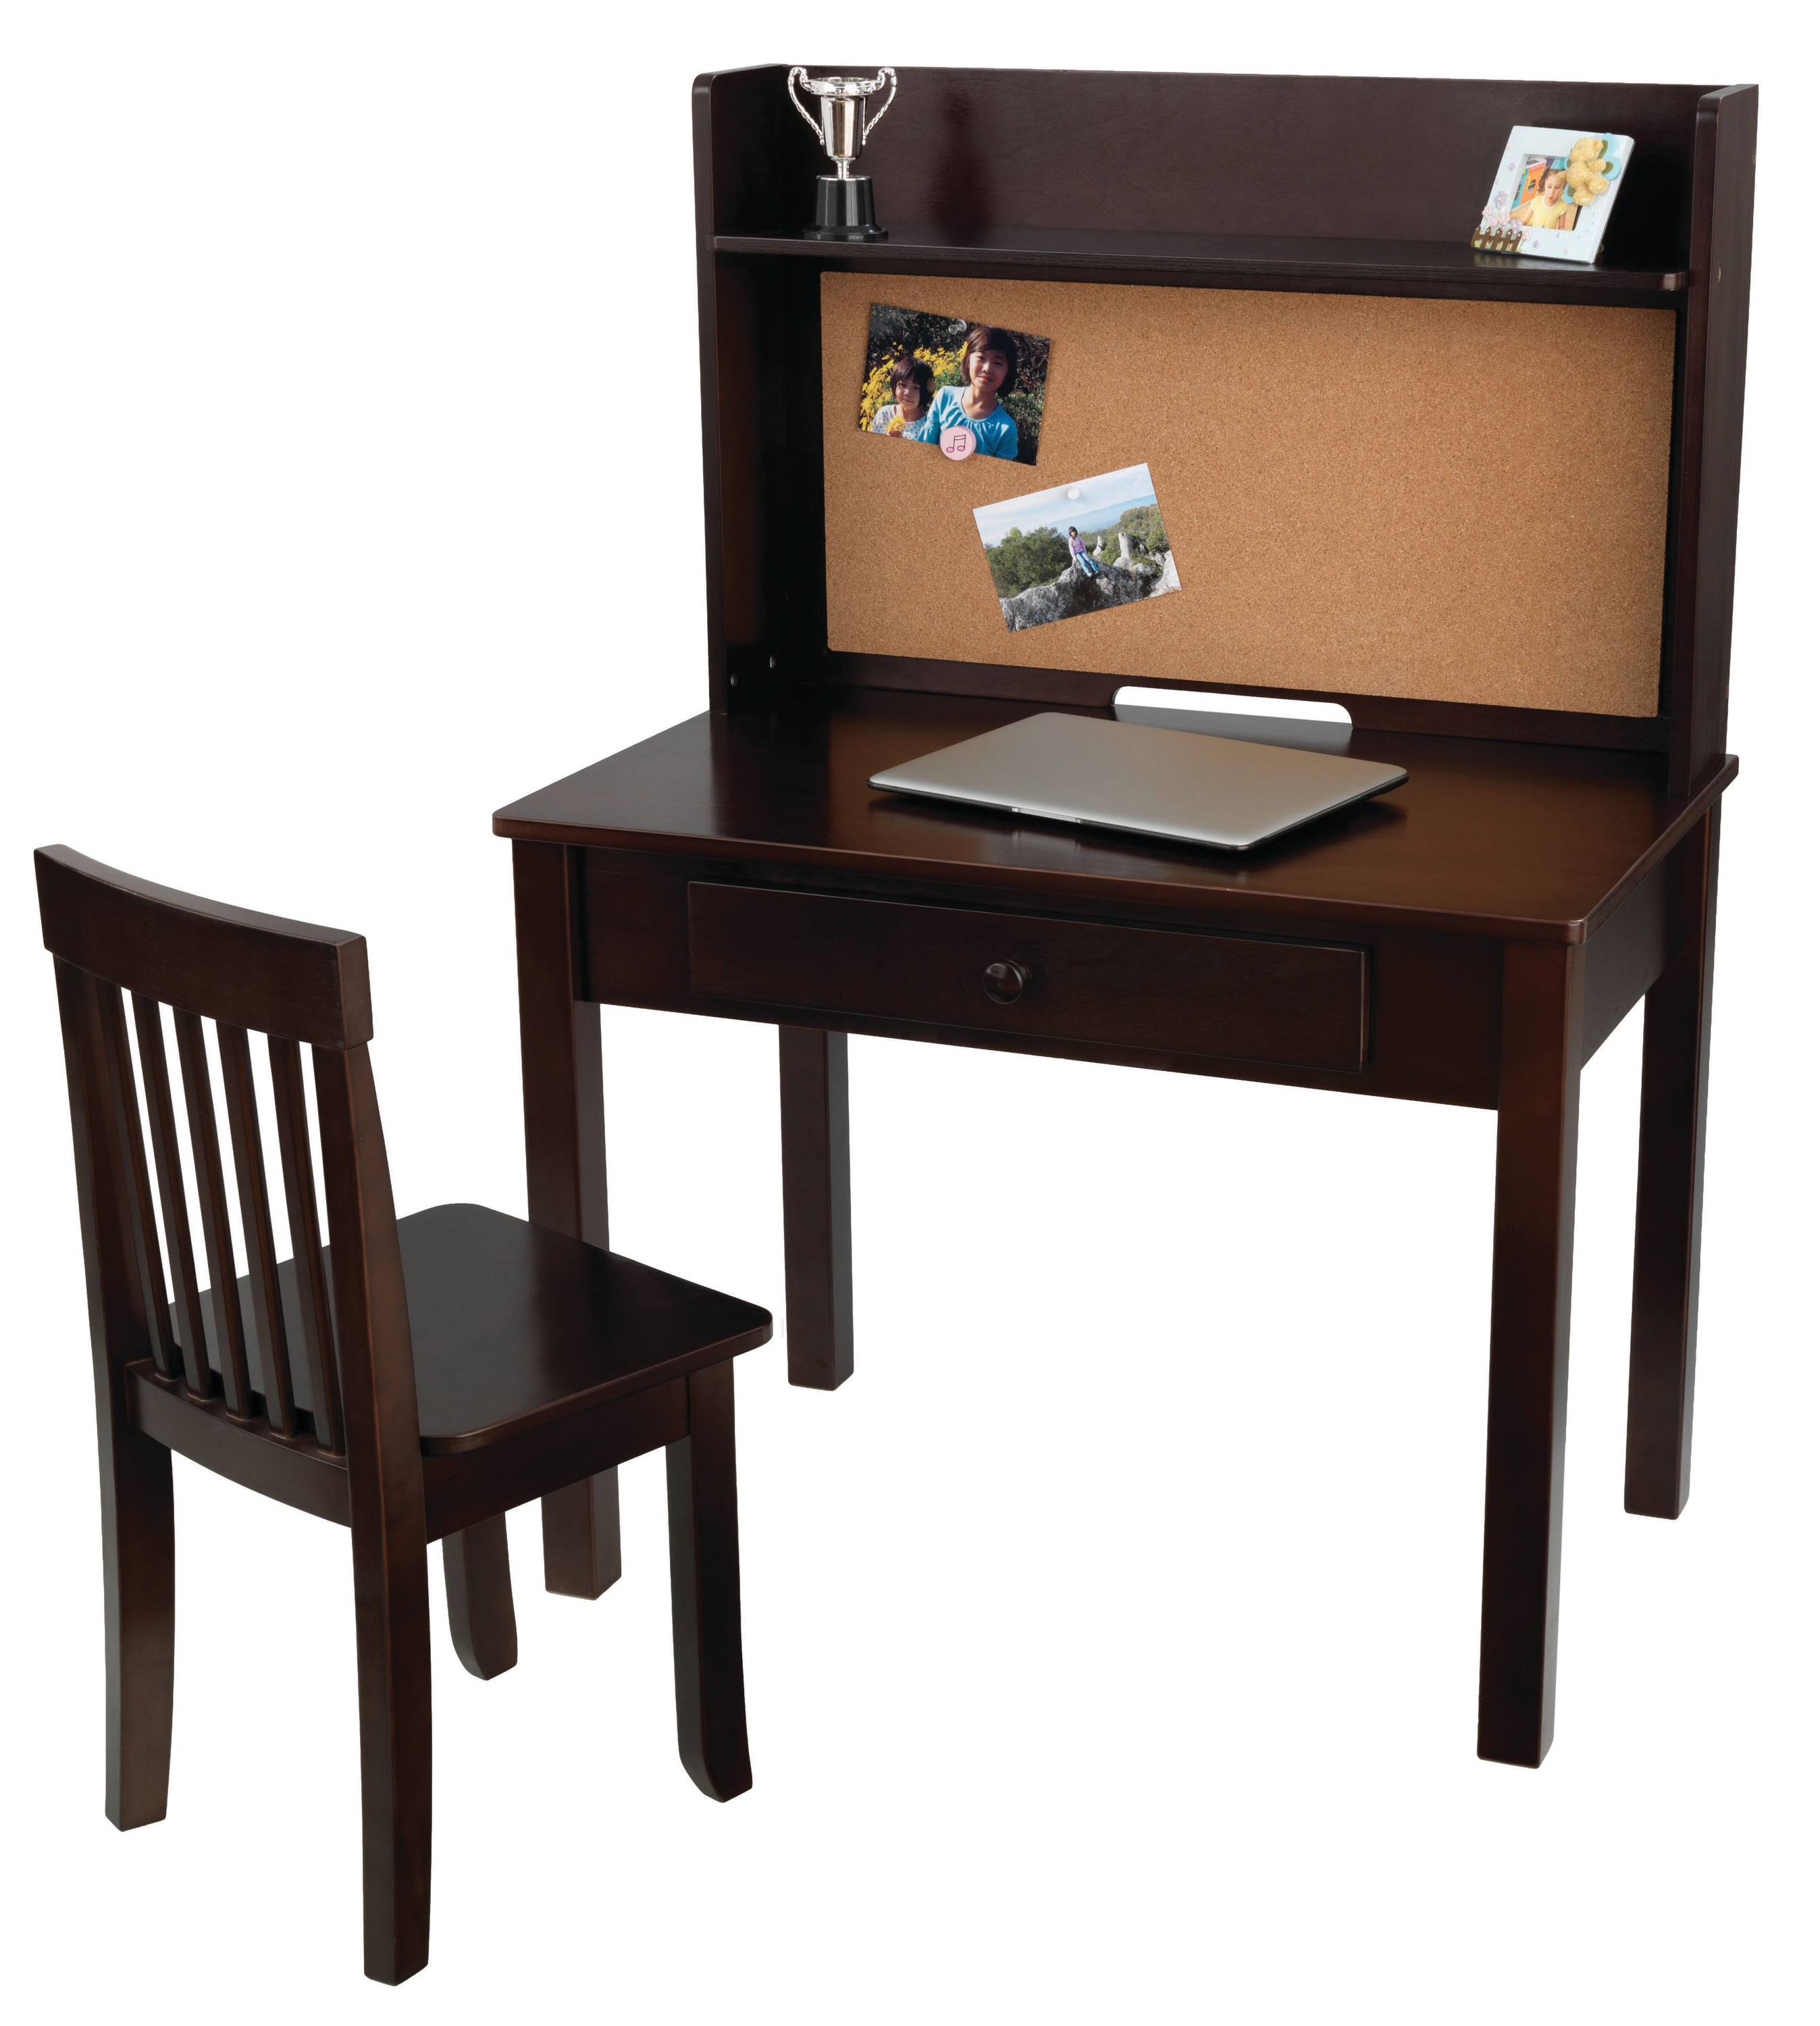 KidKraft Pinboard Wooden Desk with Drawer, Hutch, Shelf and Chair, Espresso - image 1 of 10